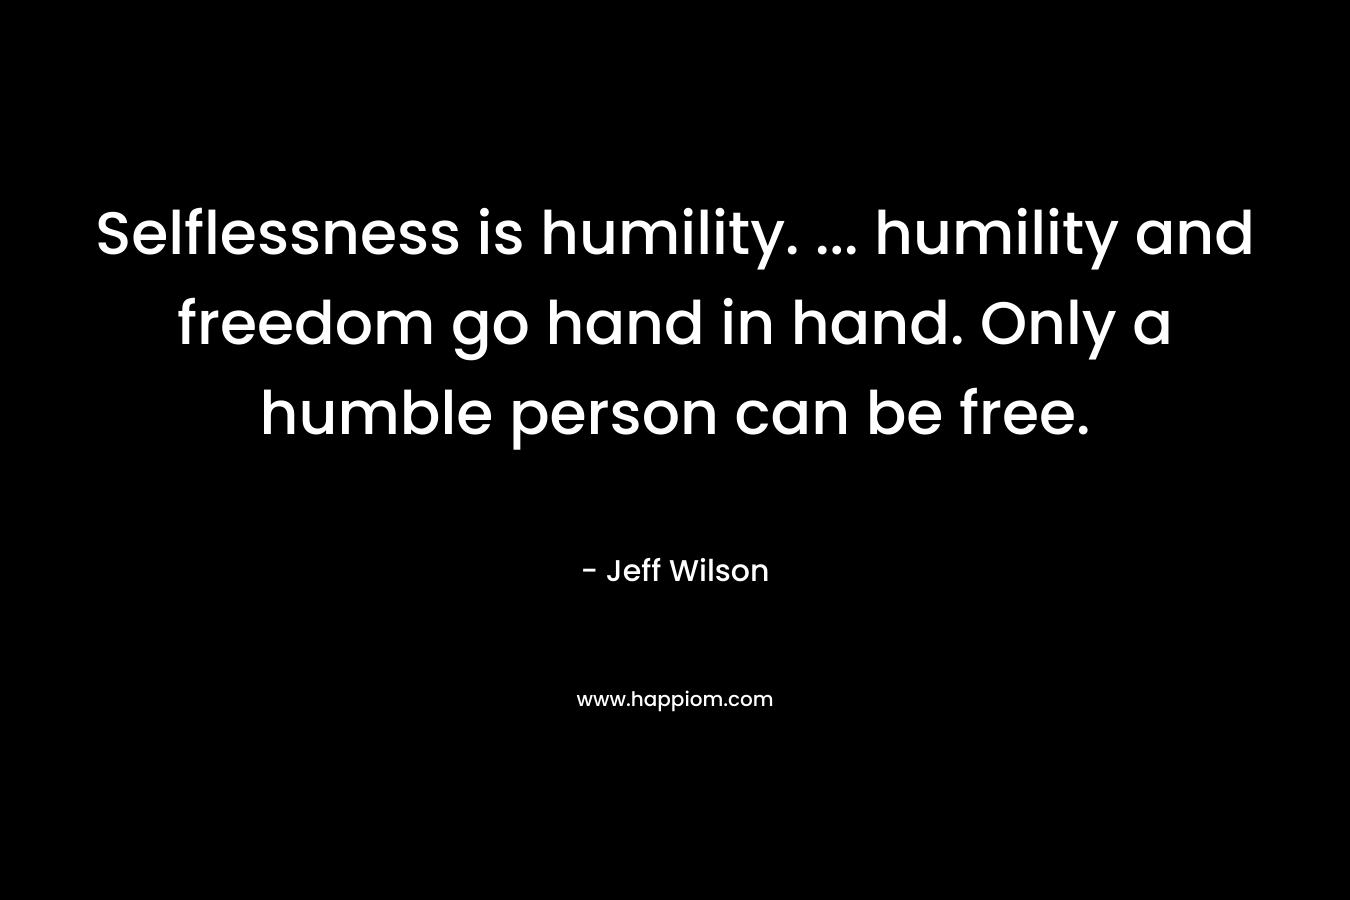 Selflessness is humility. ... humility and freedom go hand in hand. Only a humble person can be free.